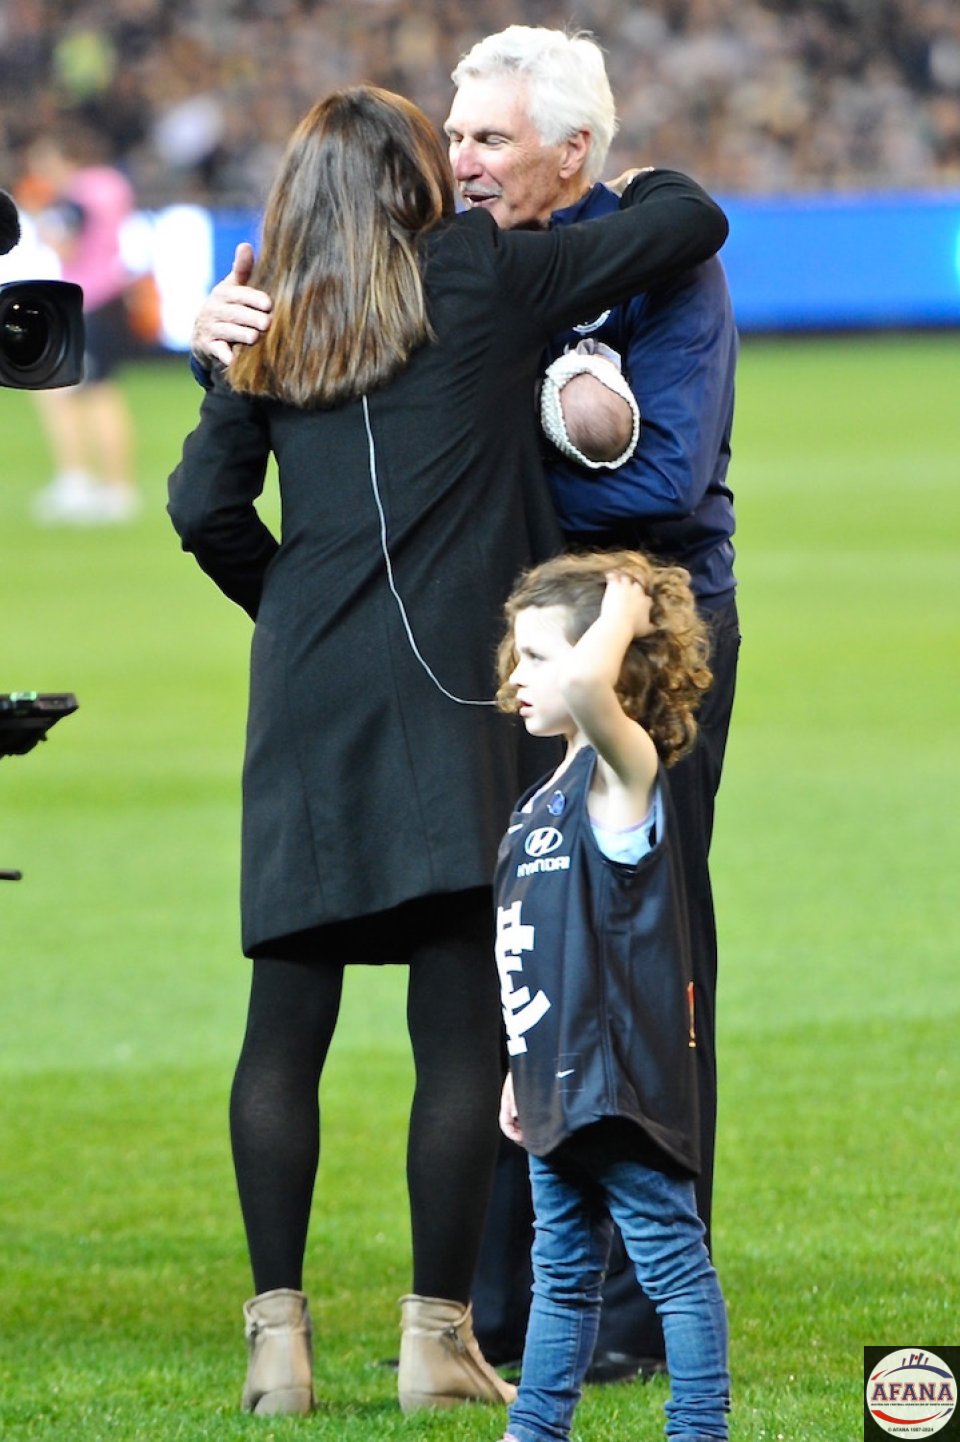 Christy Malthouse gets a hug from Dad